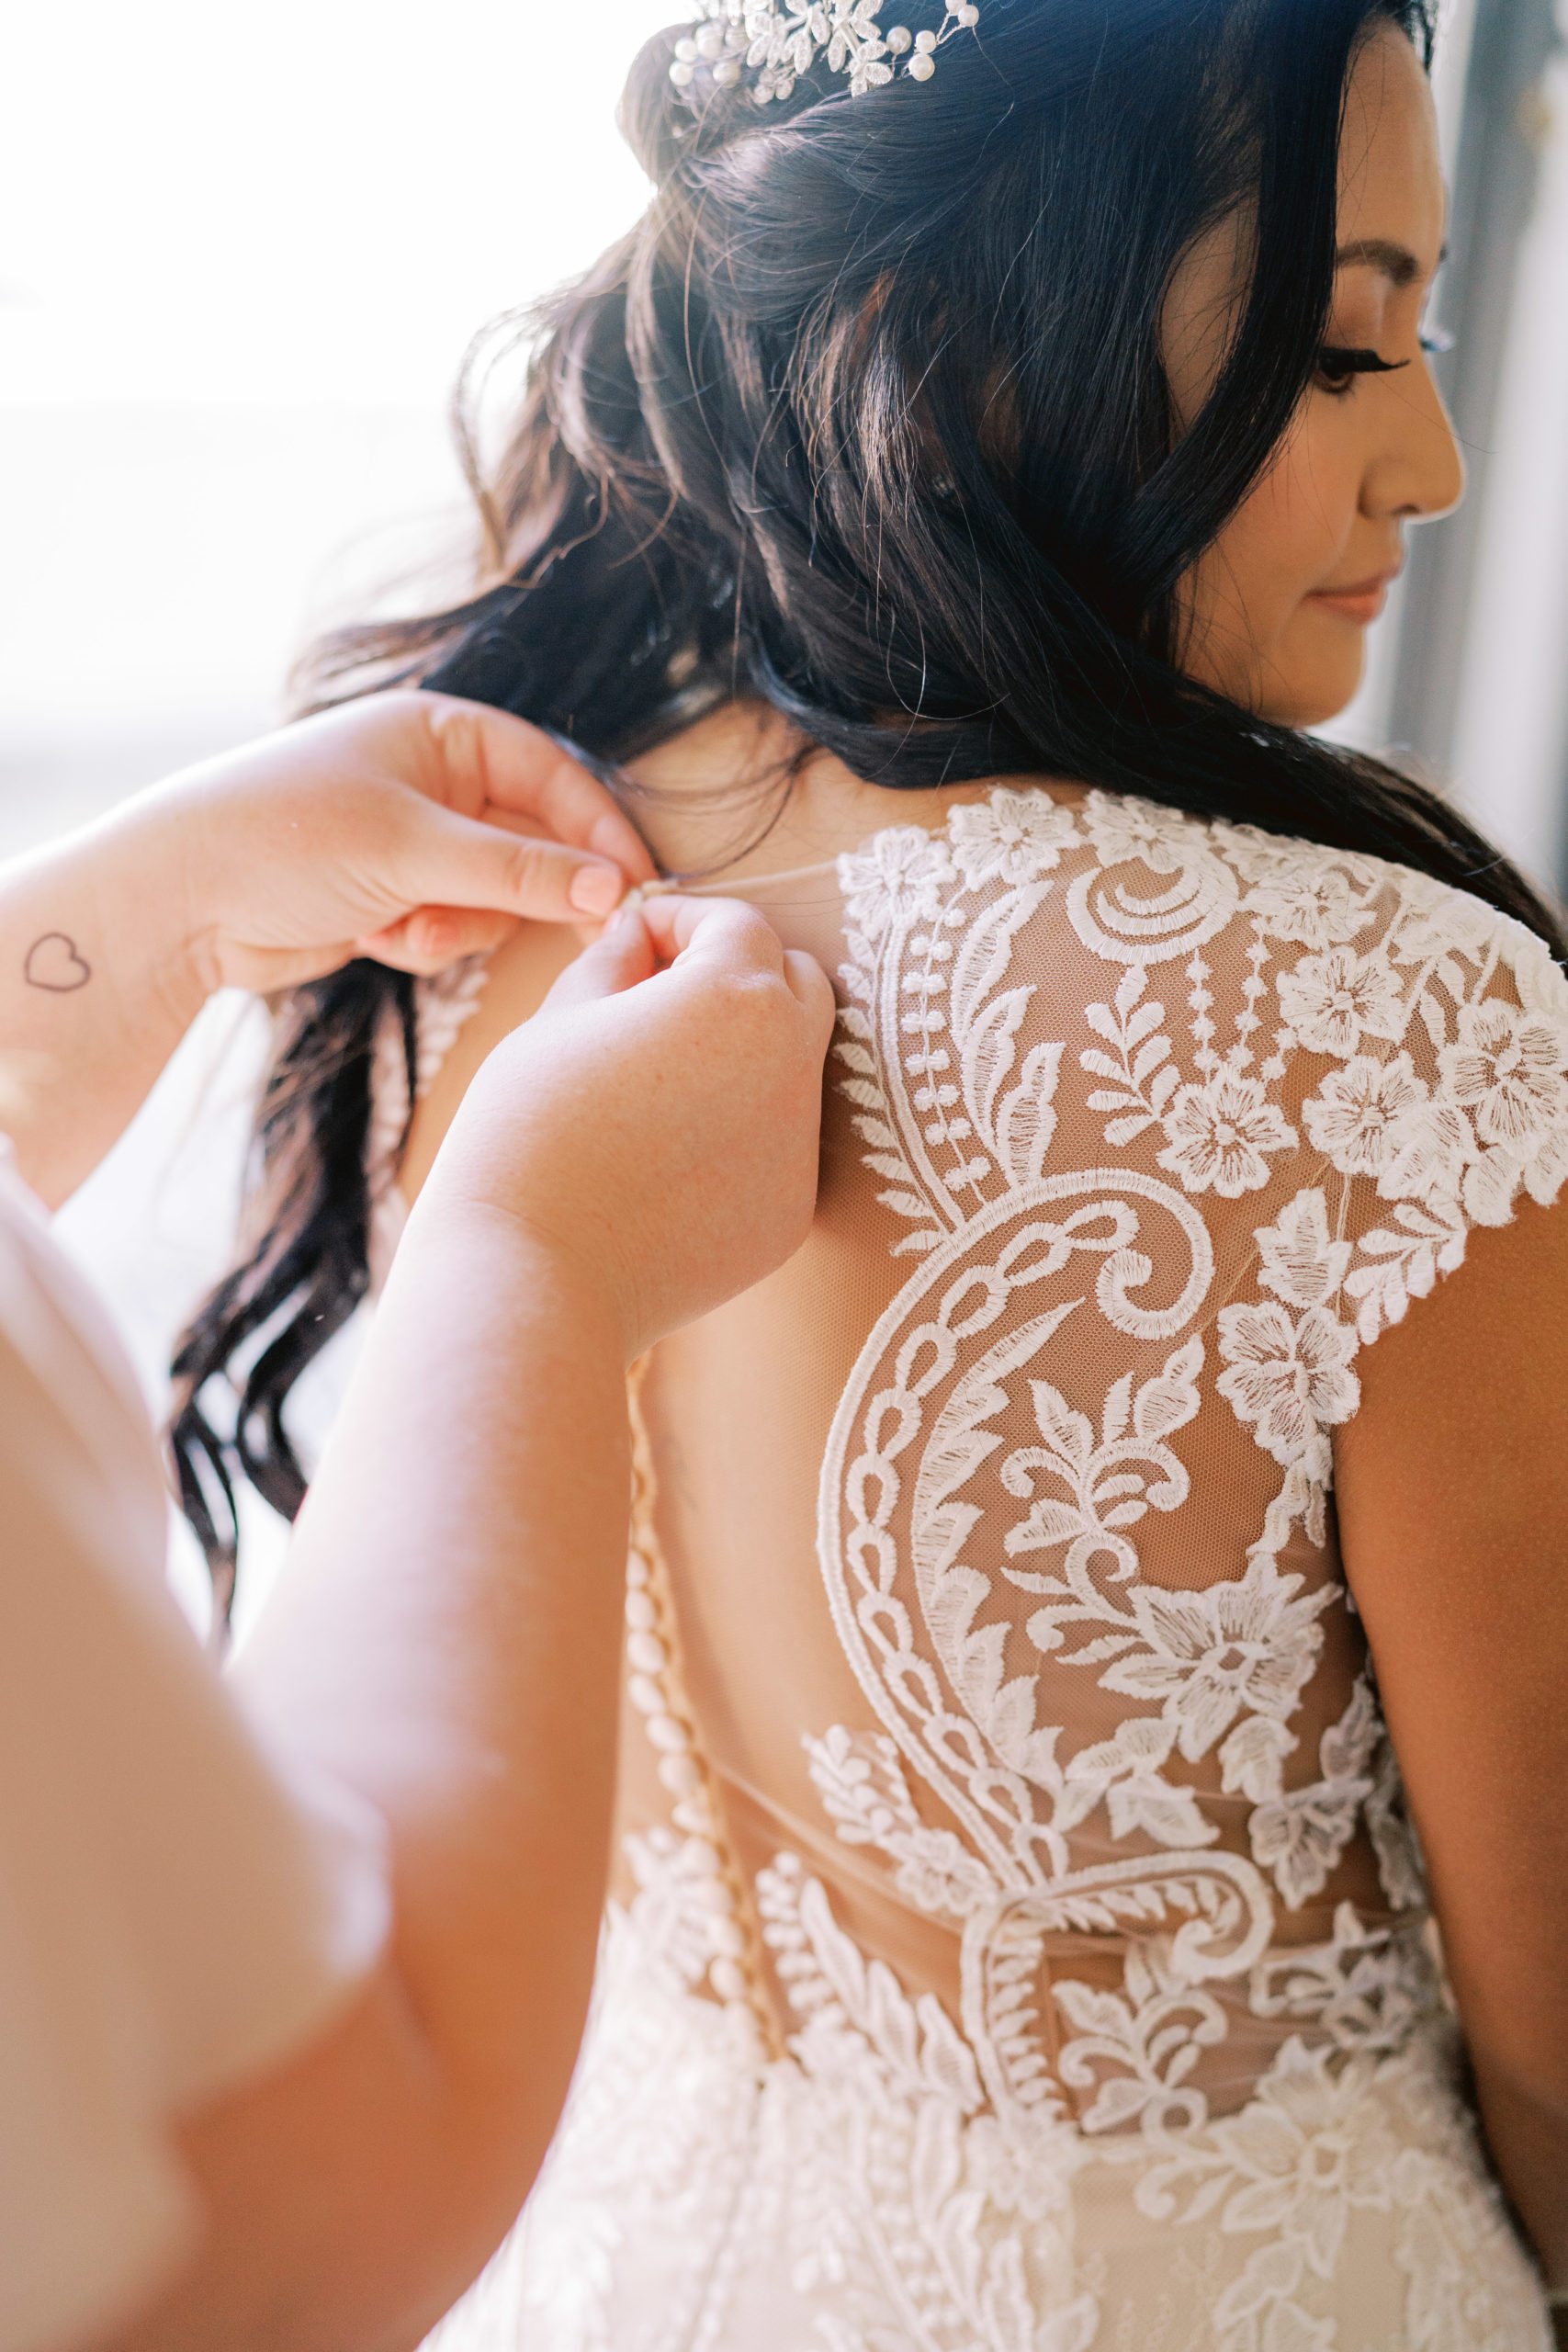 wedding dress with lace back detail and buttons